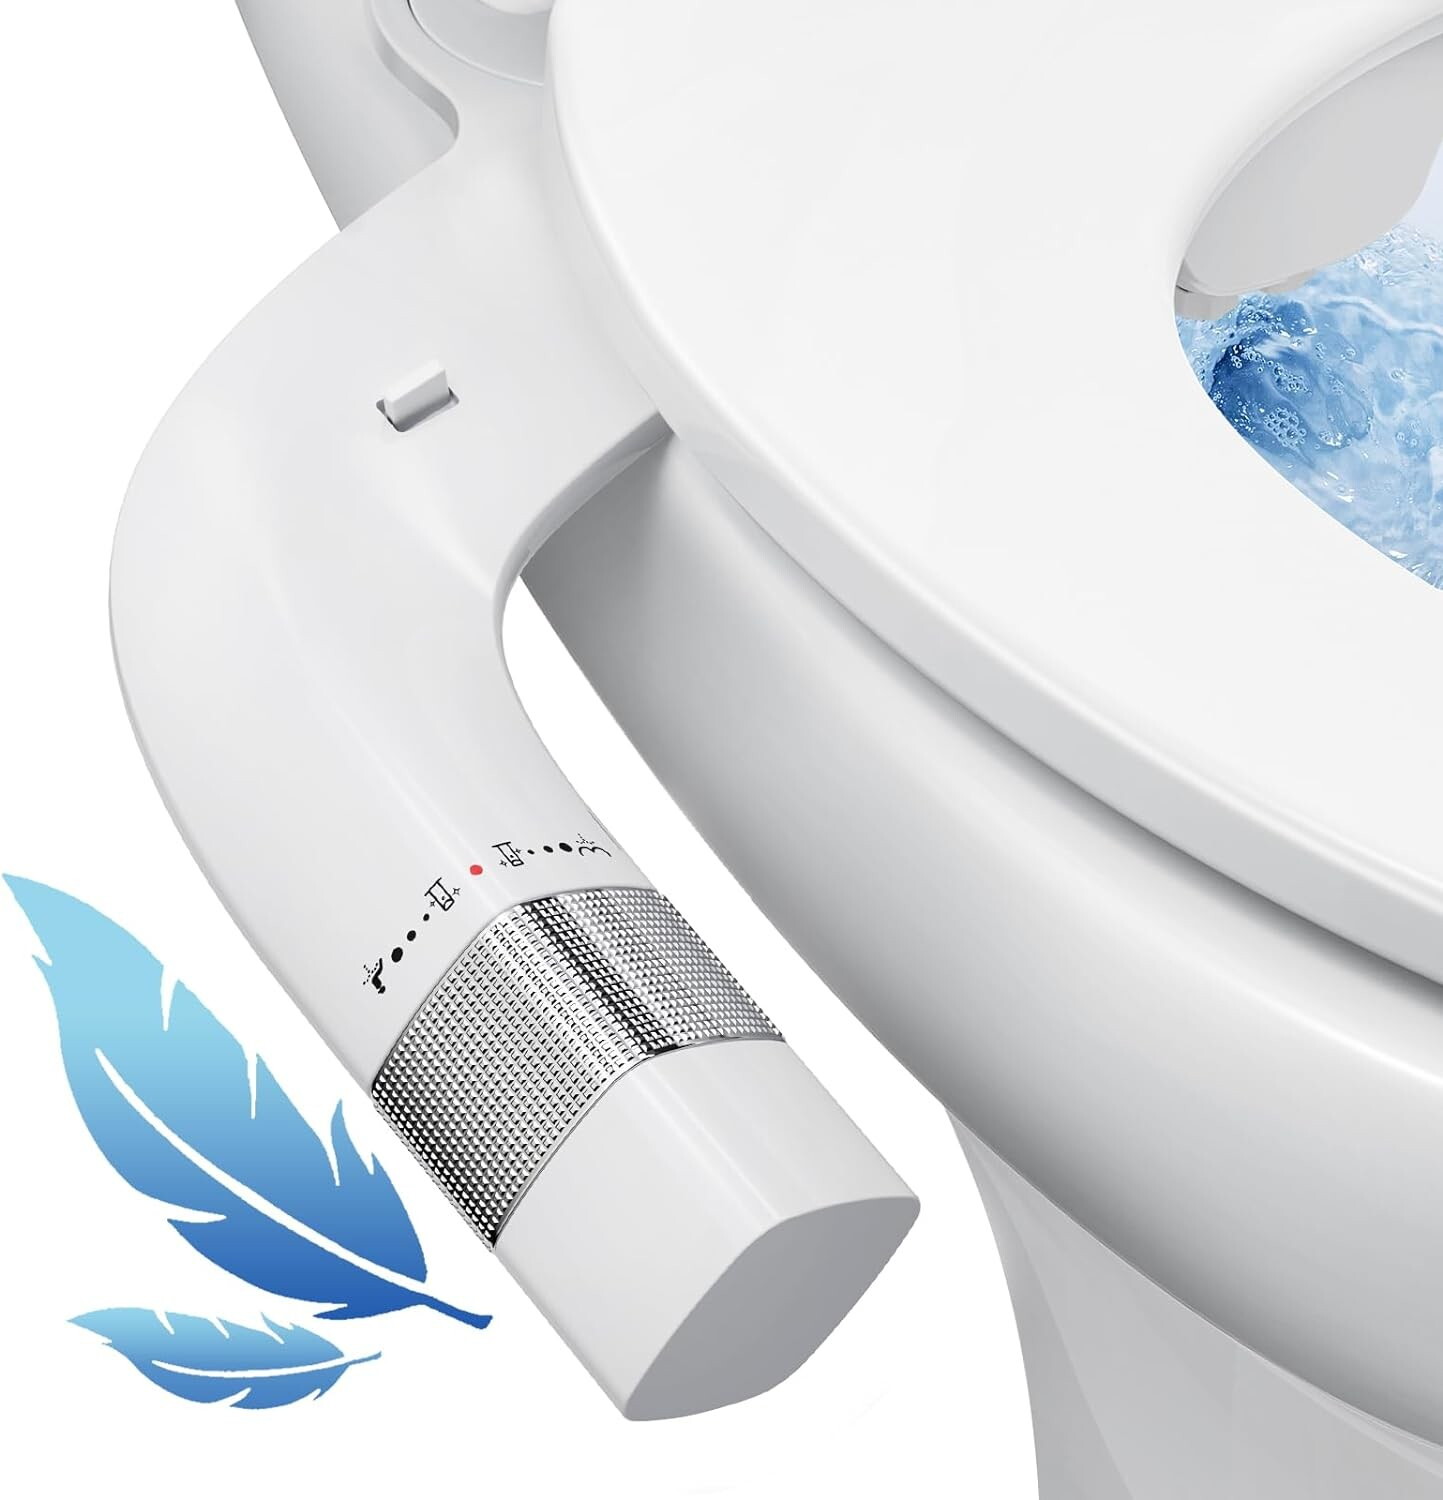 Adjustable Angle Bidet Attachment for Toilet